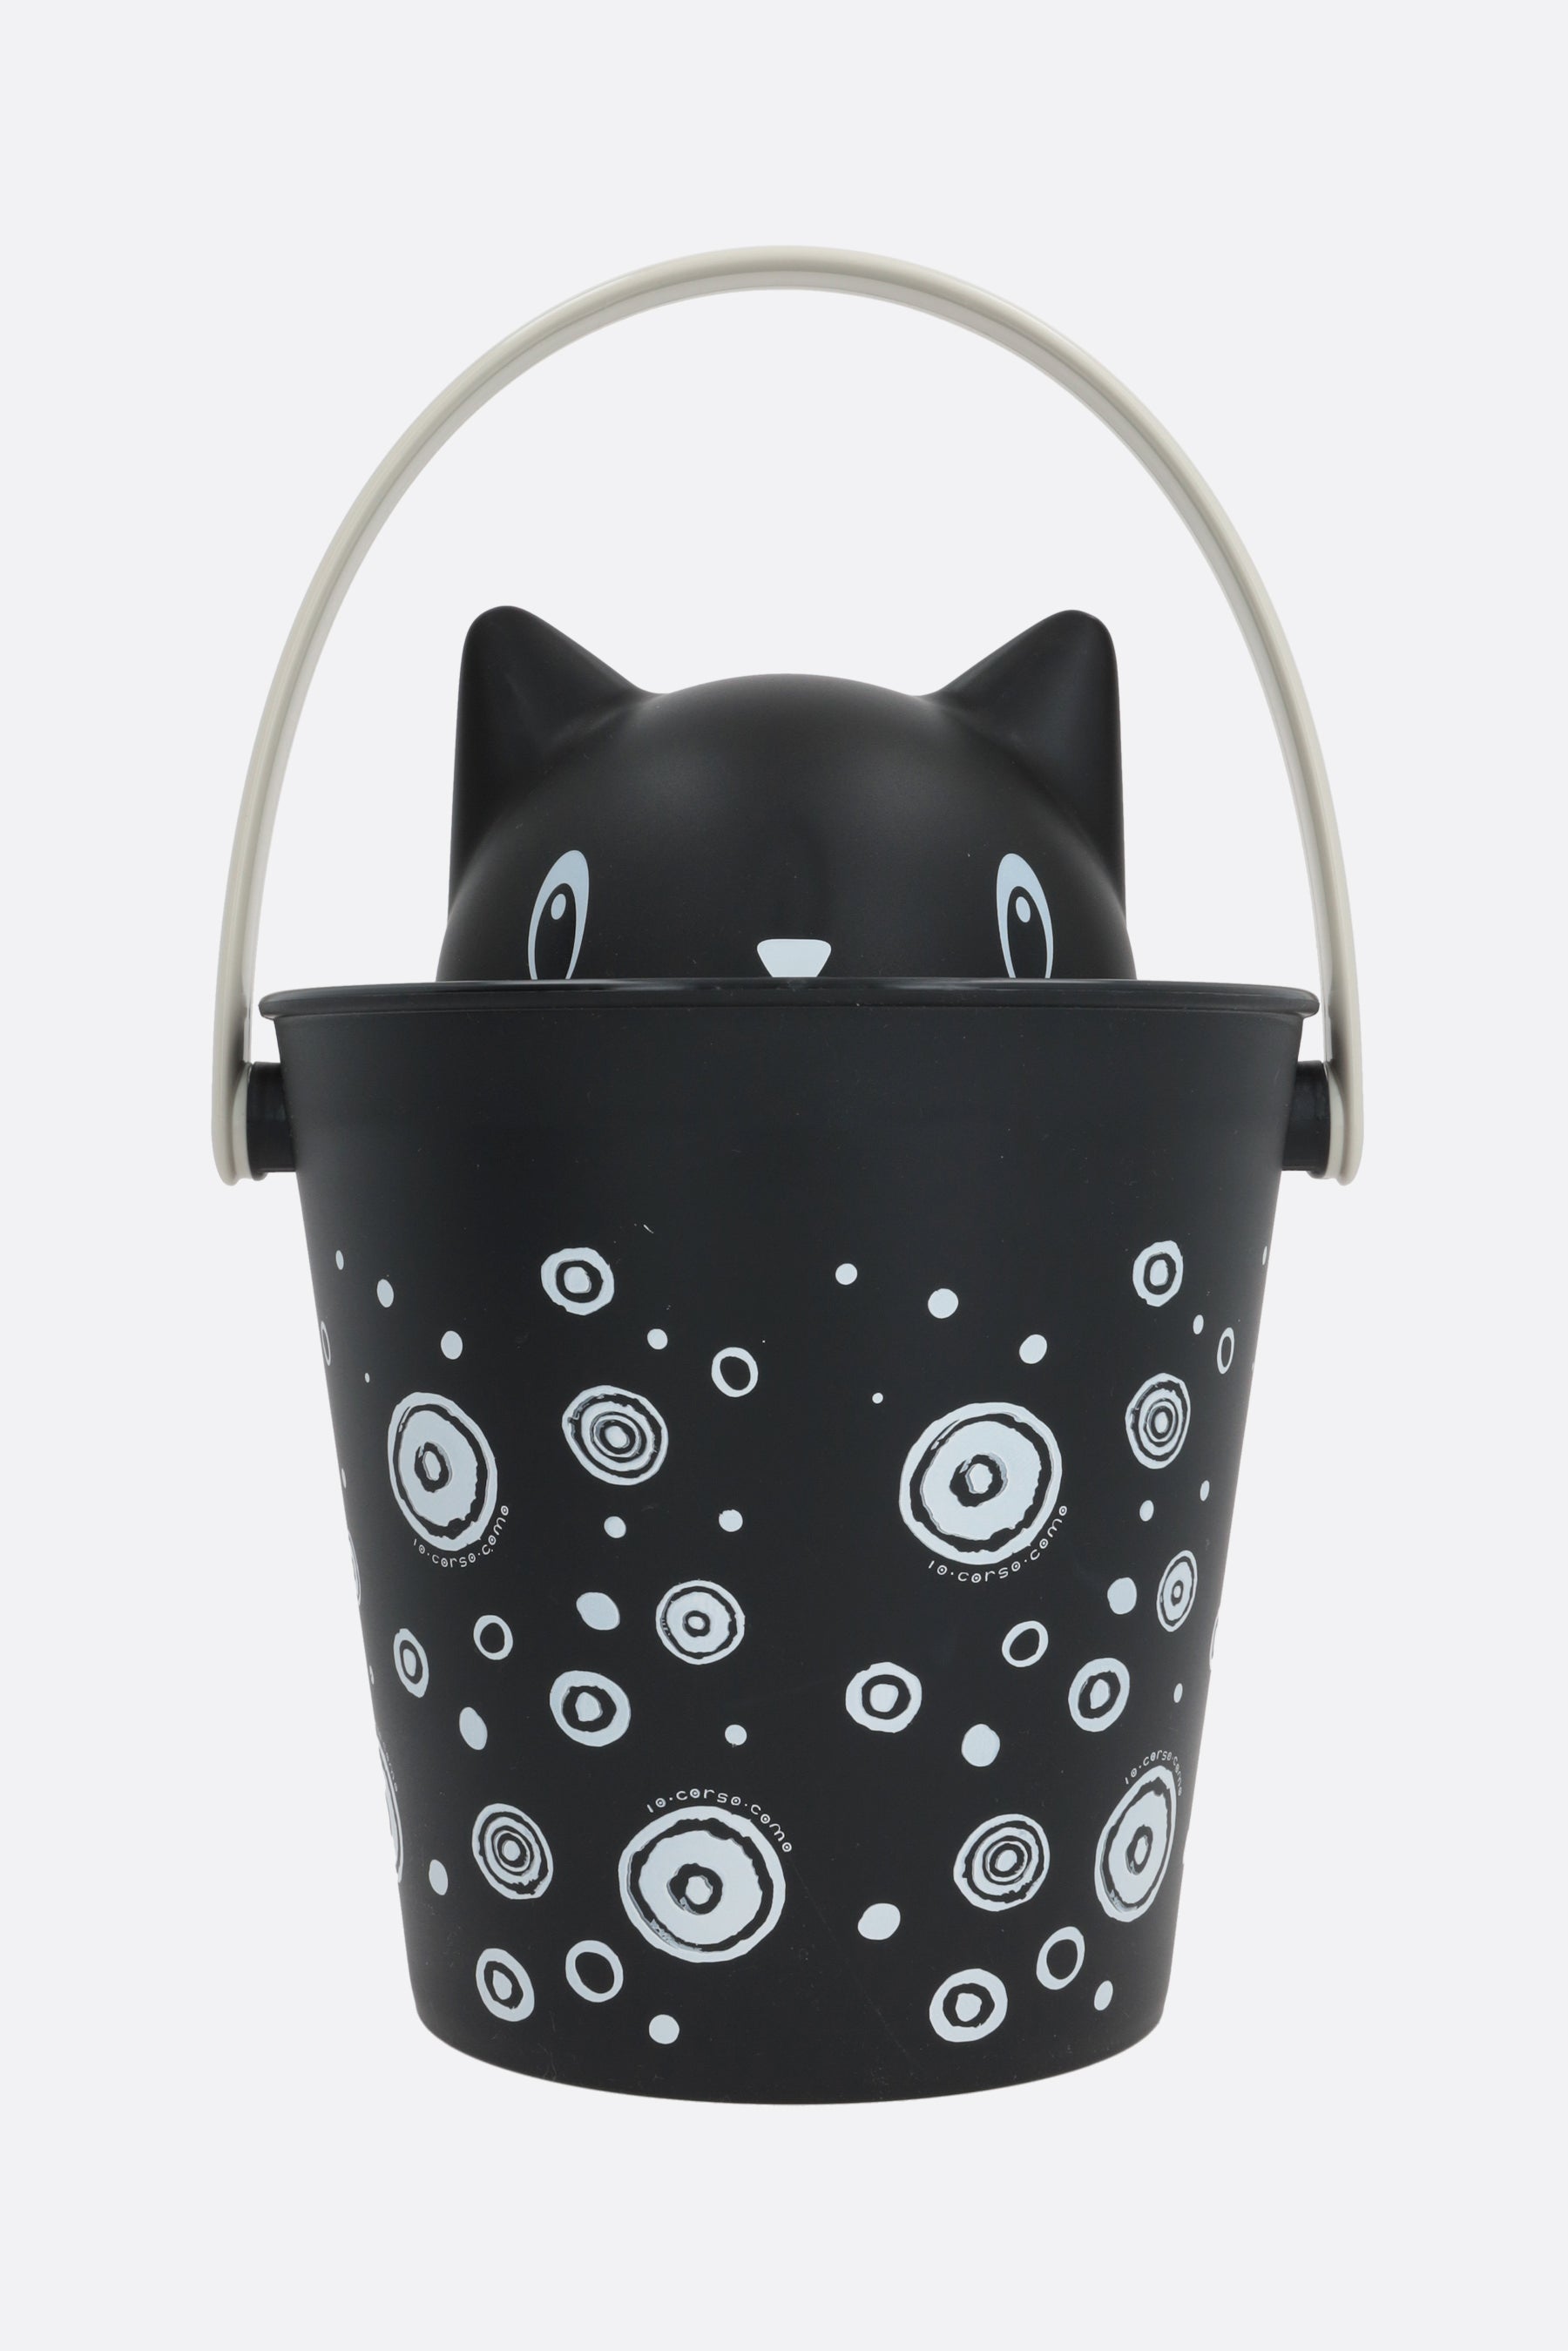 Crick recycled plastic dry cat food container